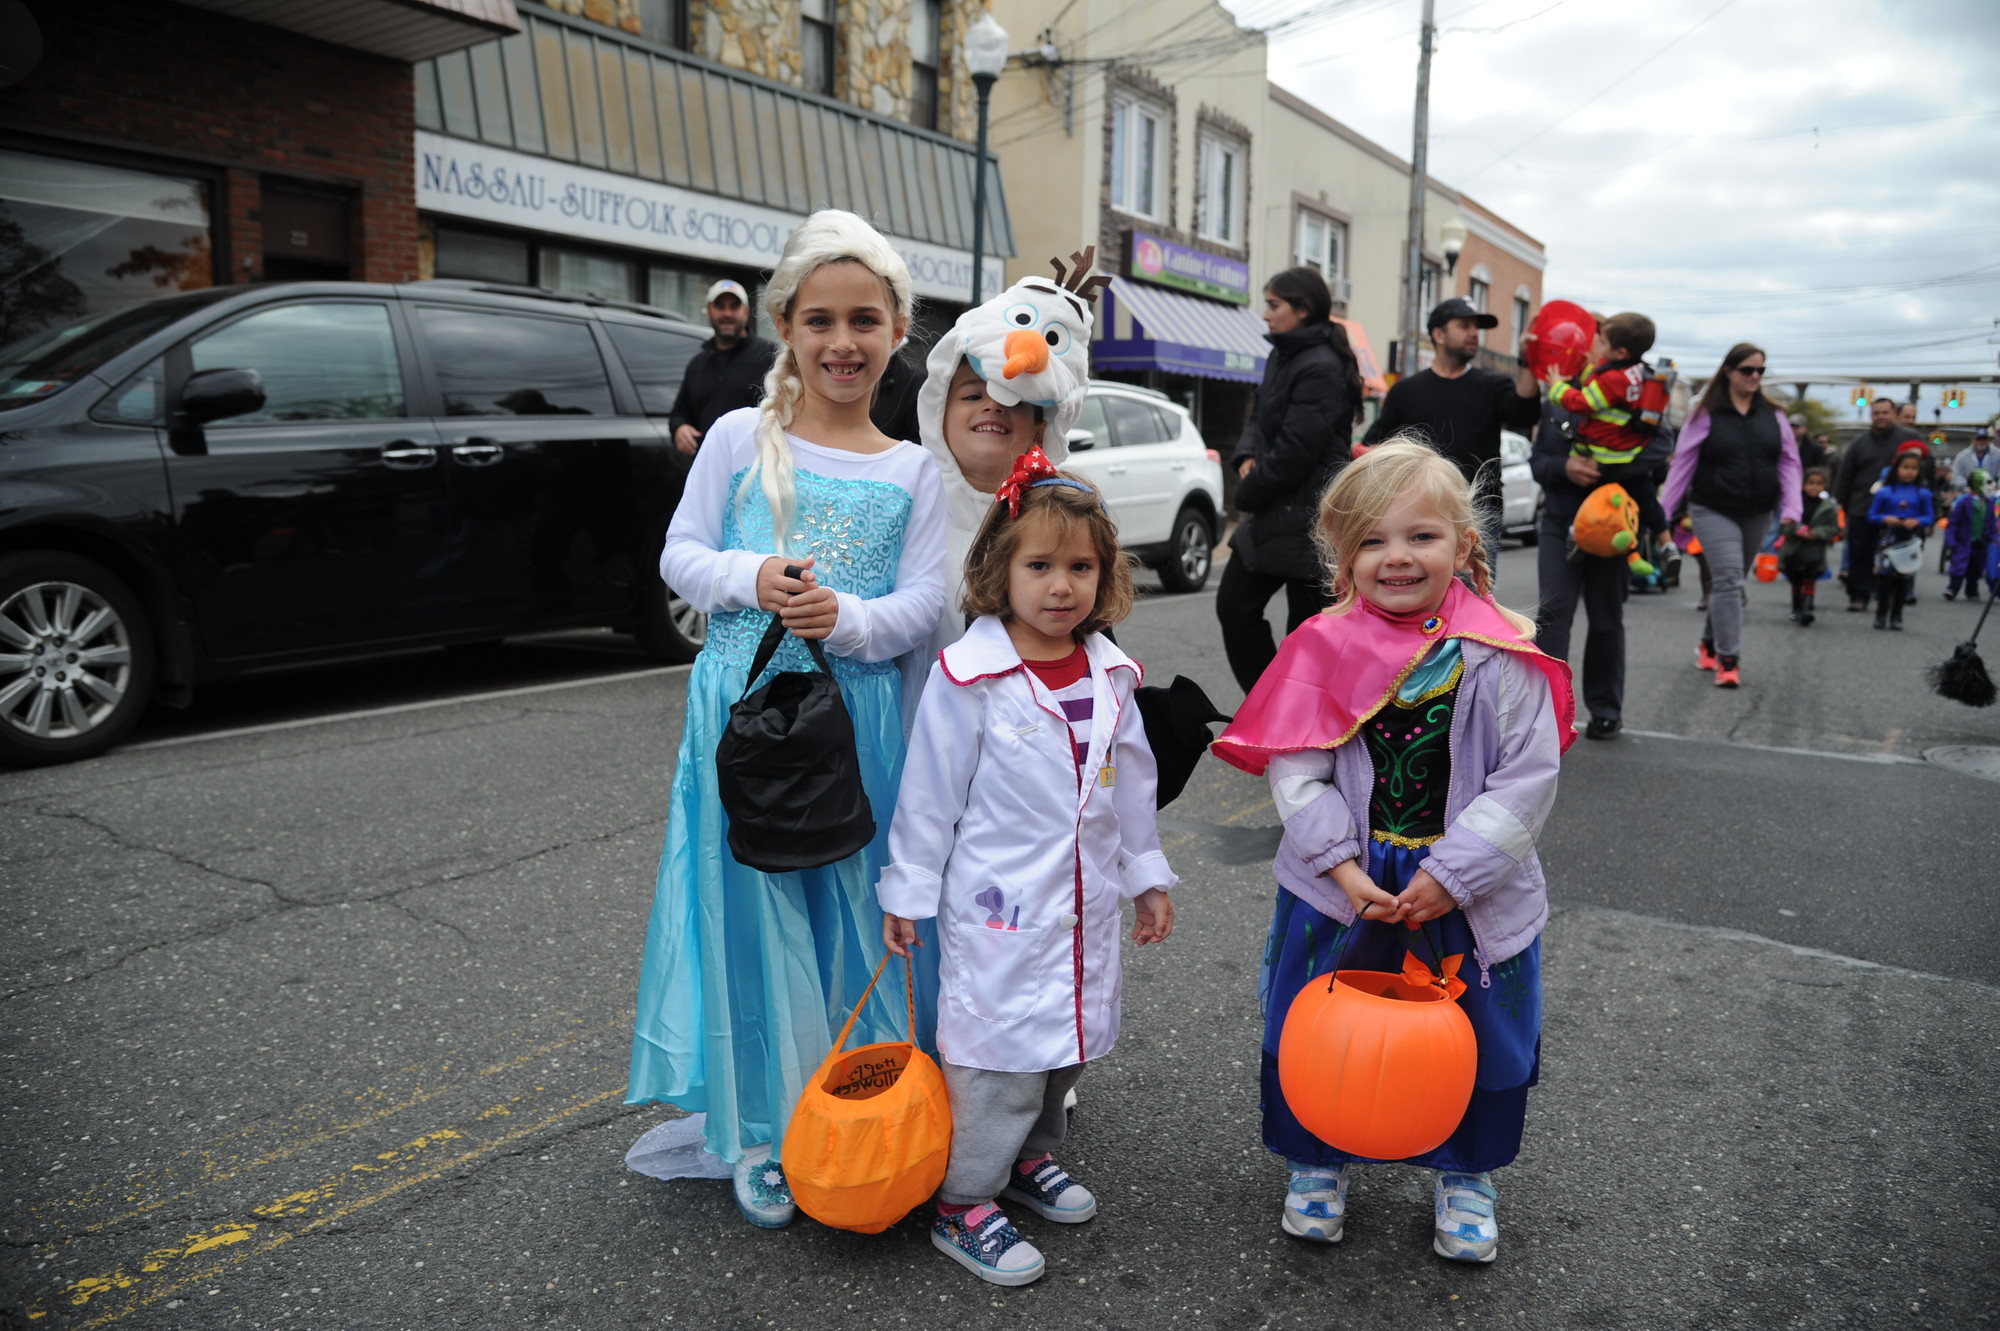 Many youngsters wore "Frozen" -themed costumes for the special occasion.